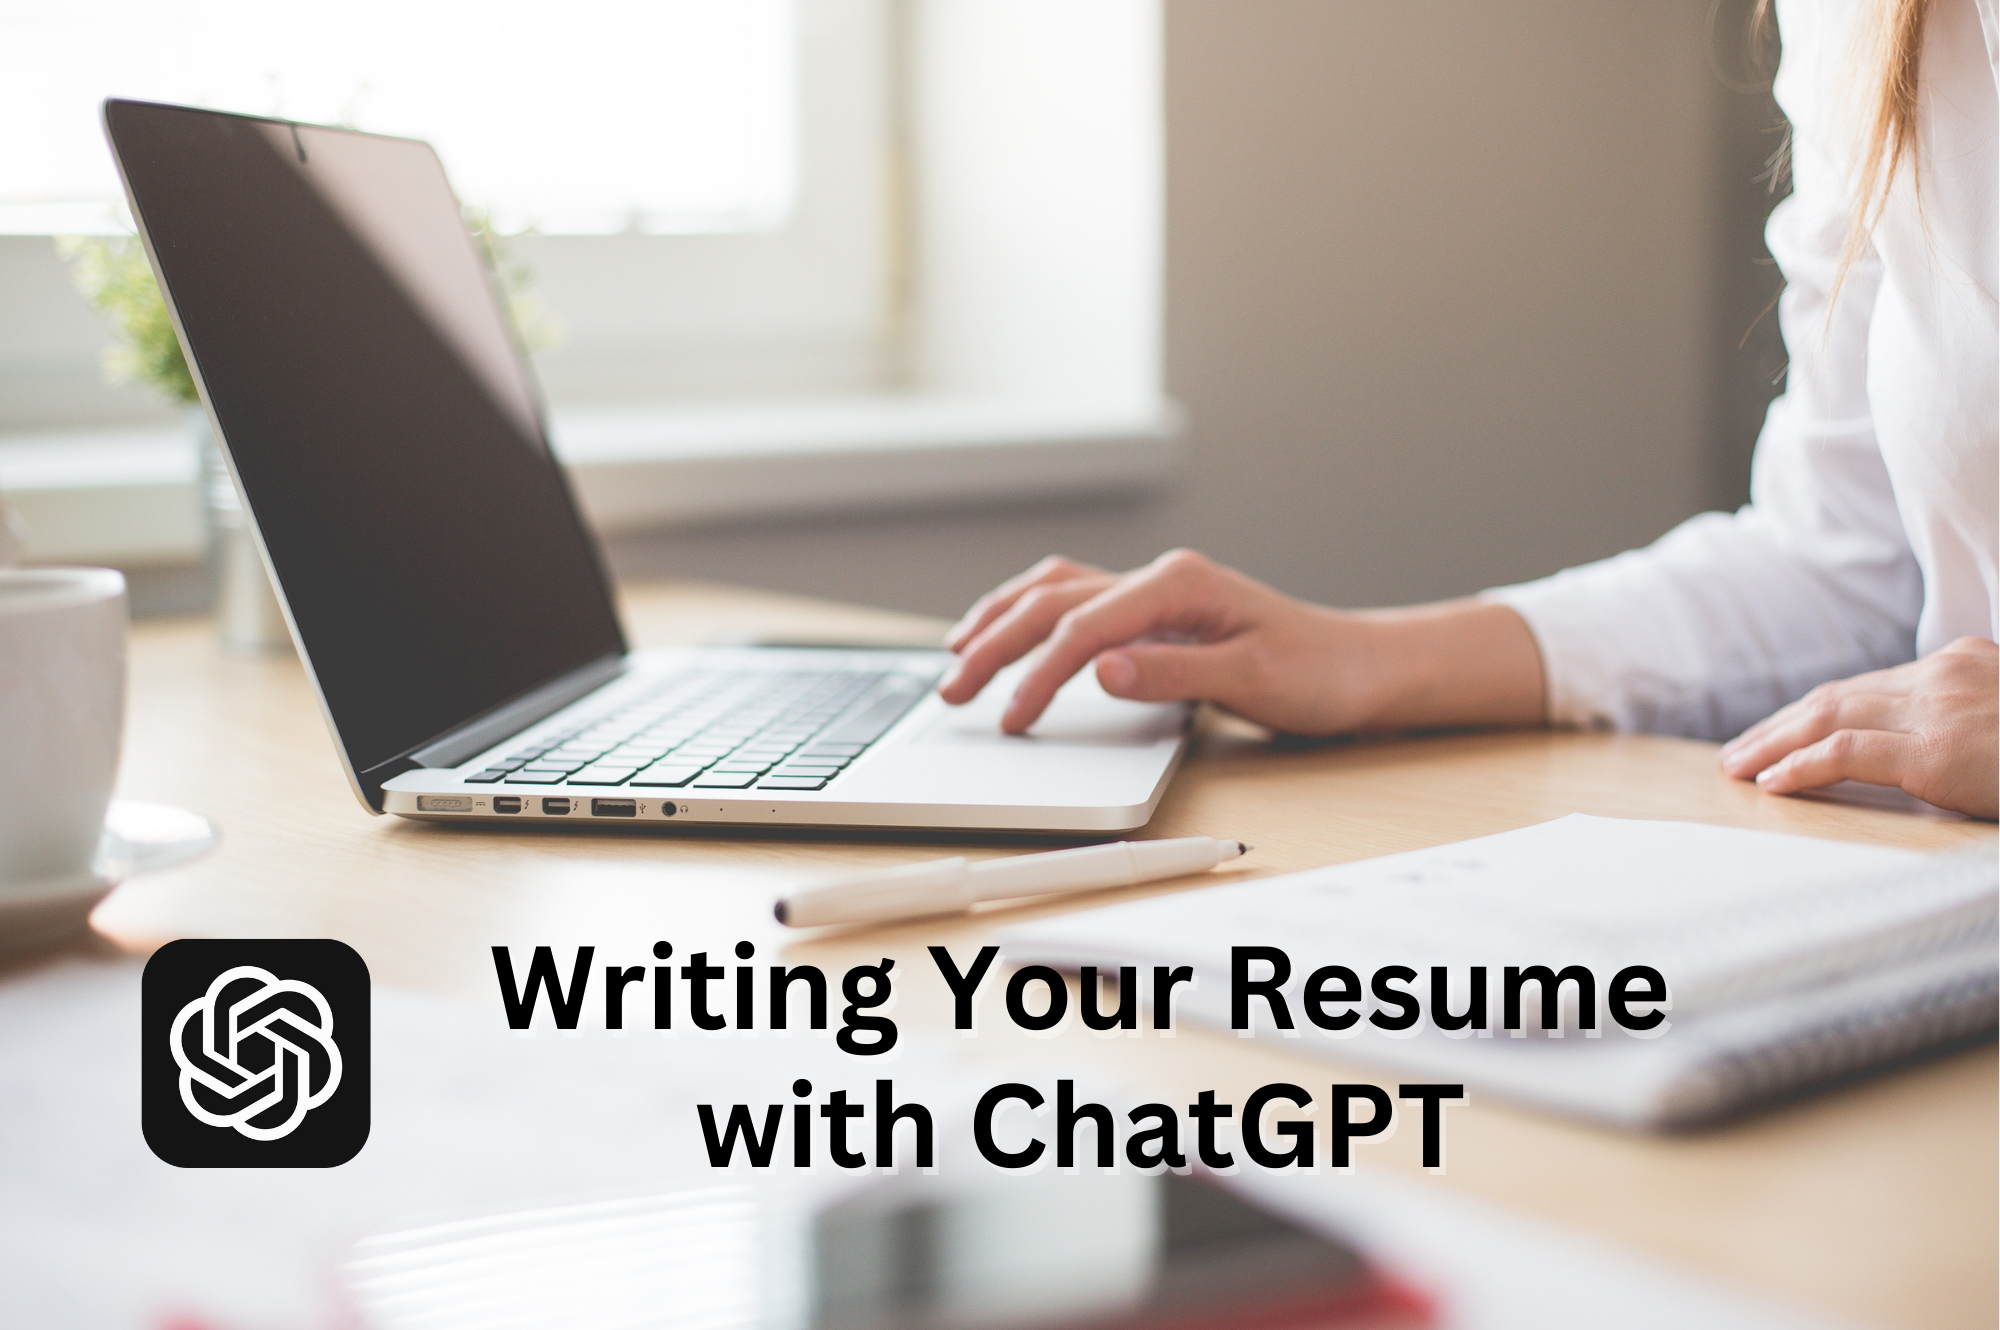 Writing Your Resume with ChatGPT: A Step-by-Step Guide